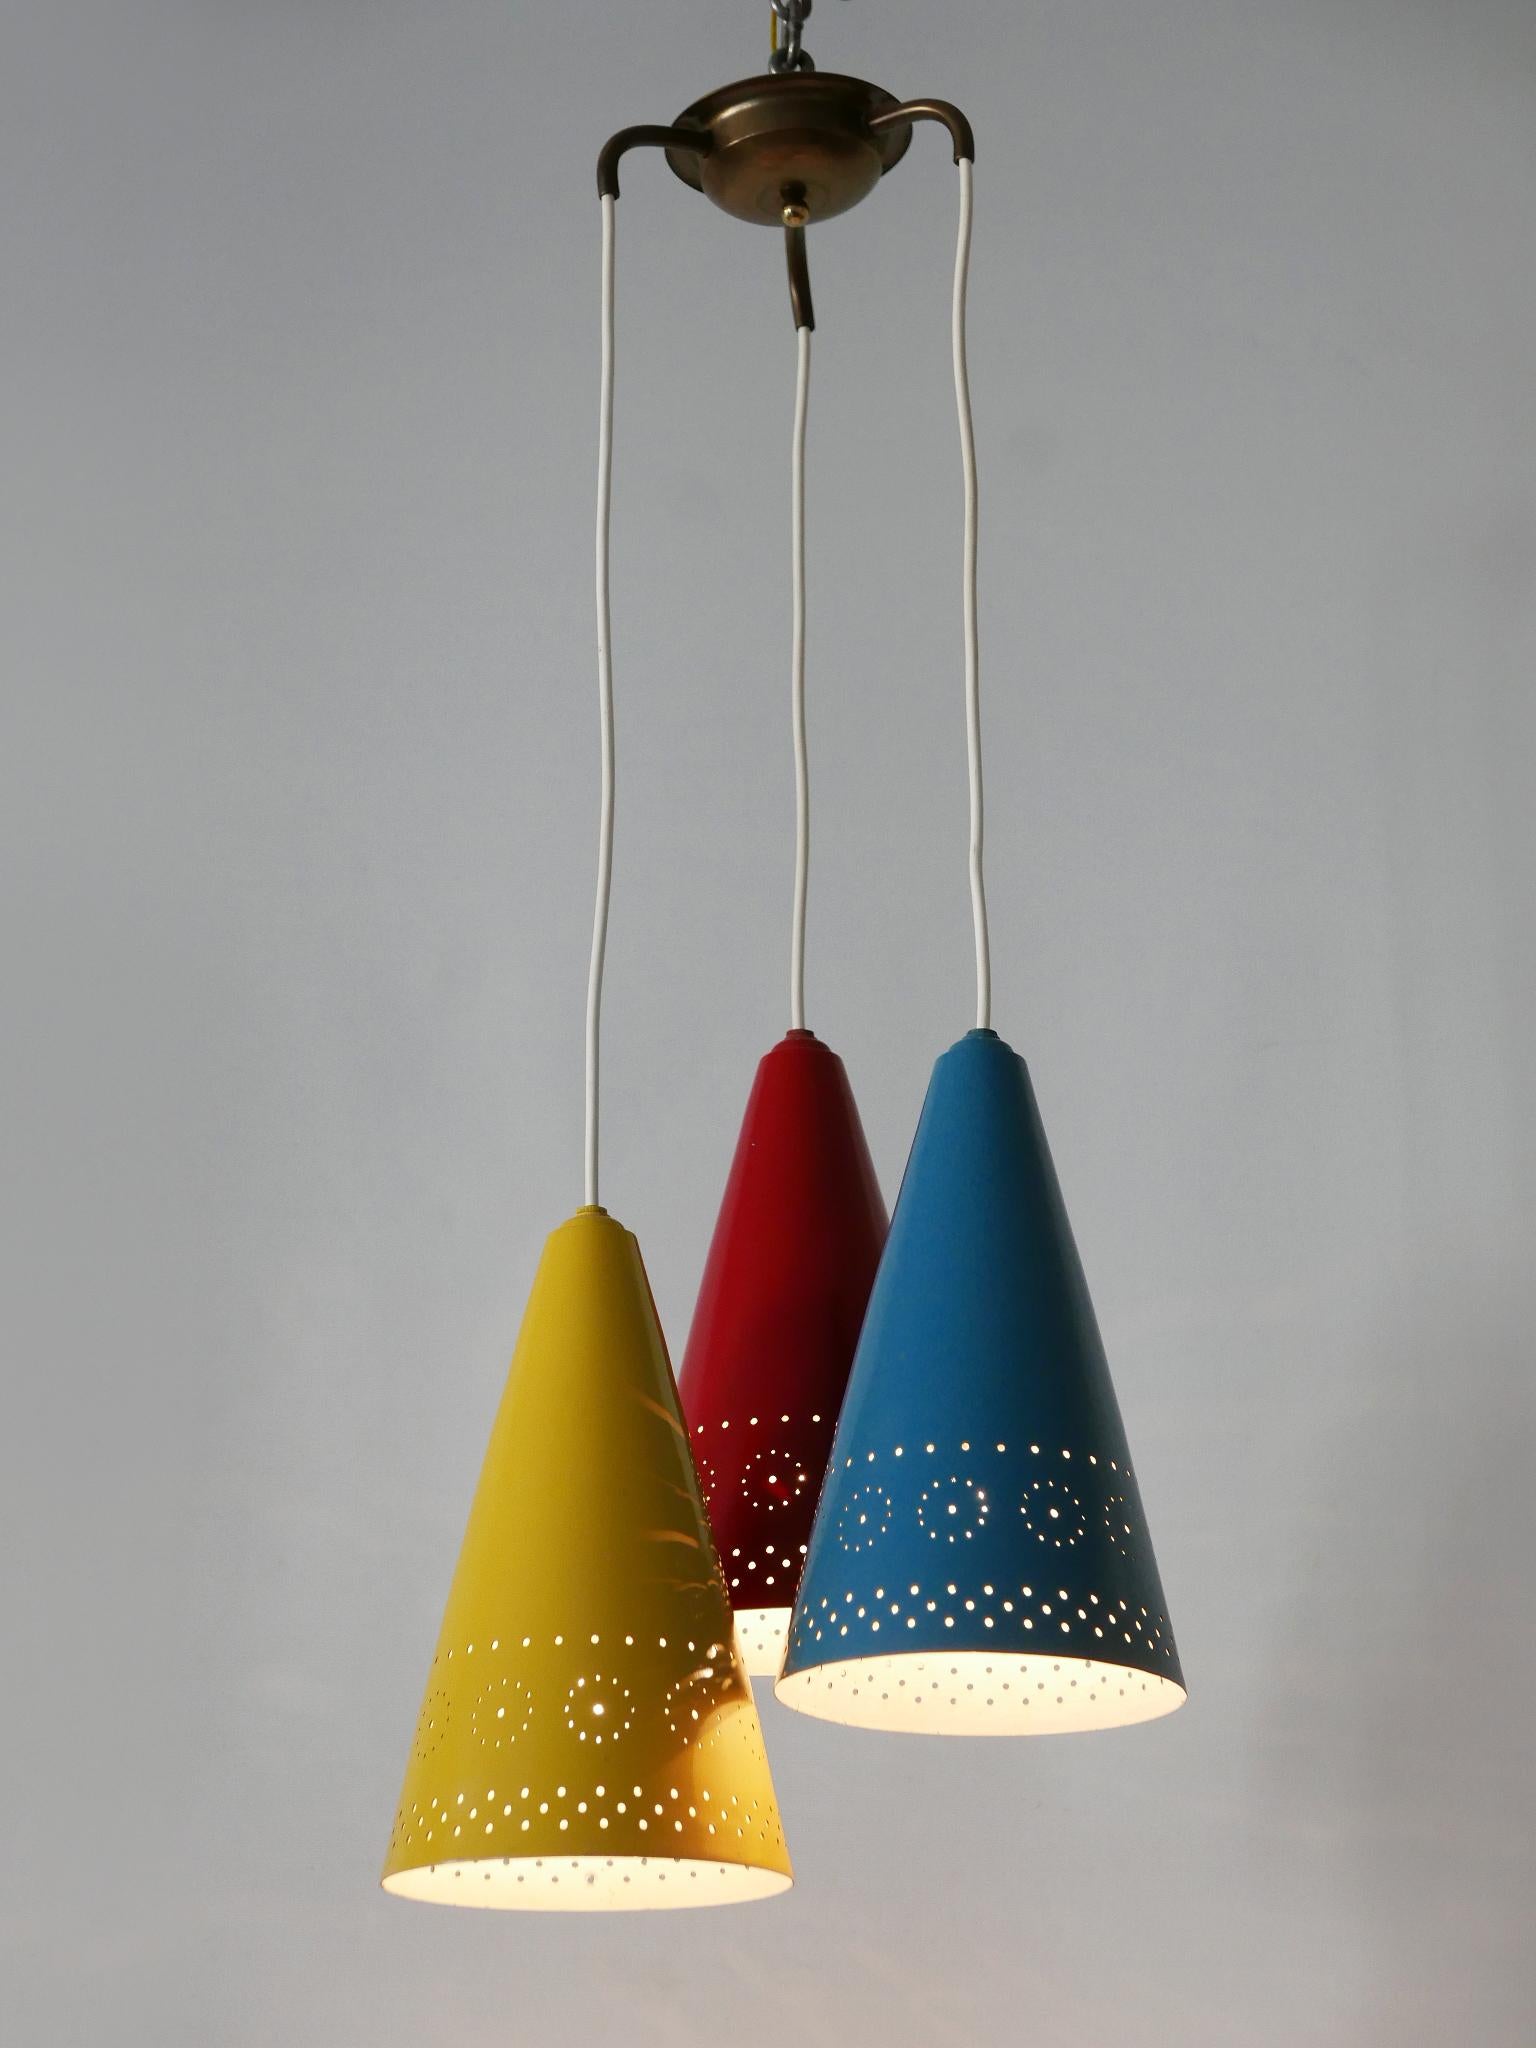 Extremely Rare & Lovely Mid Century Modern Cascading Pendant Lamp Germany 1960s For Sale 2